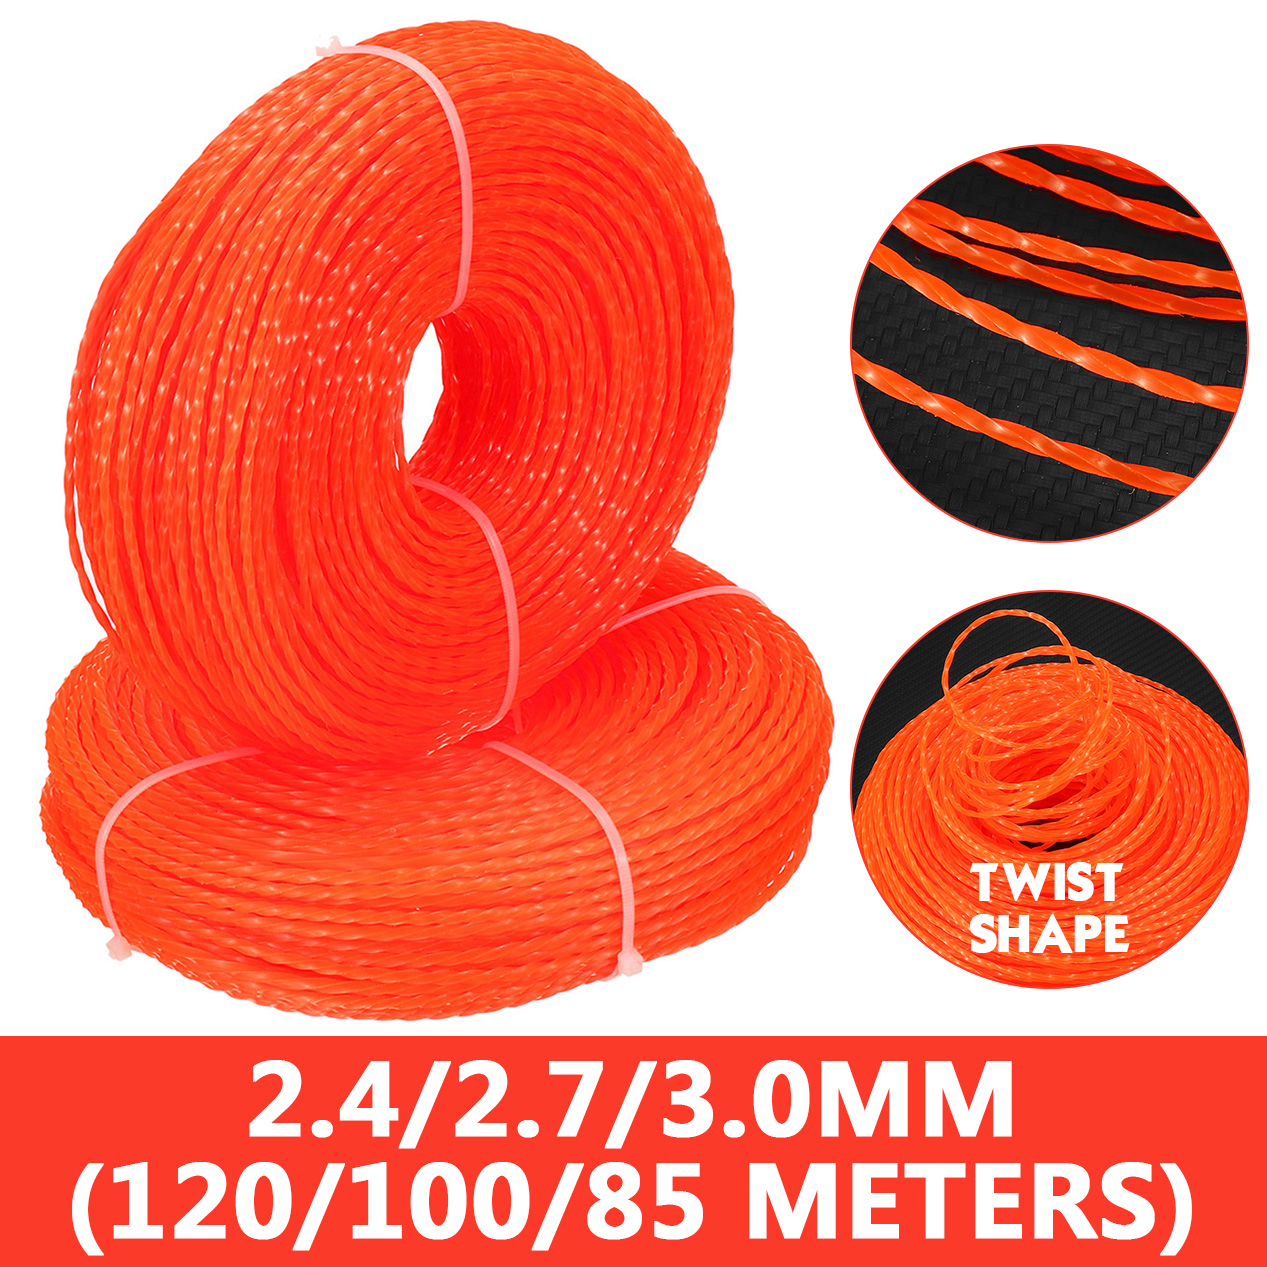 242730-mm-Commercial-Spiral-Twist-Trimmer-Line-Whipper-Snipper-Cord-1790010-1